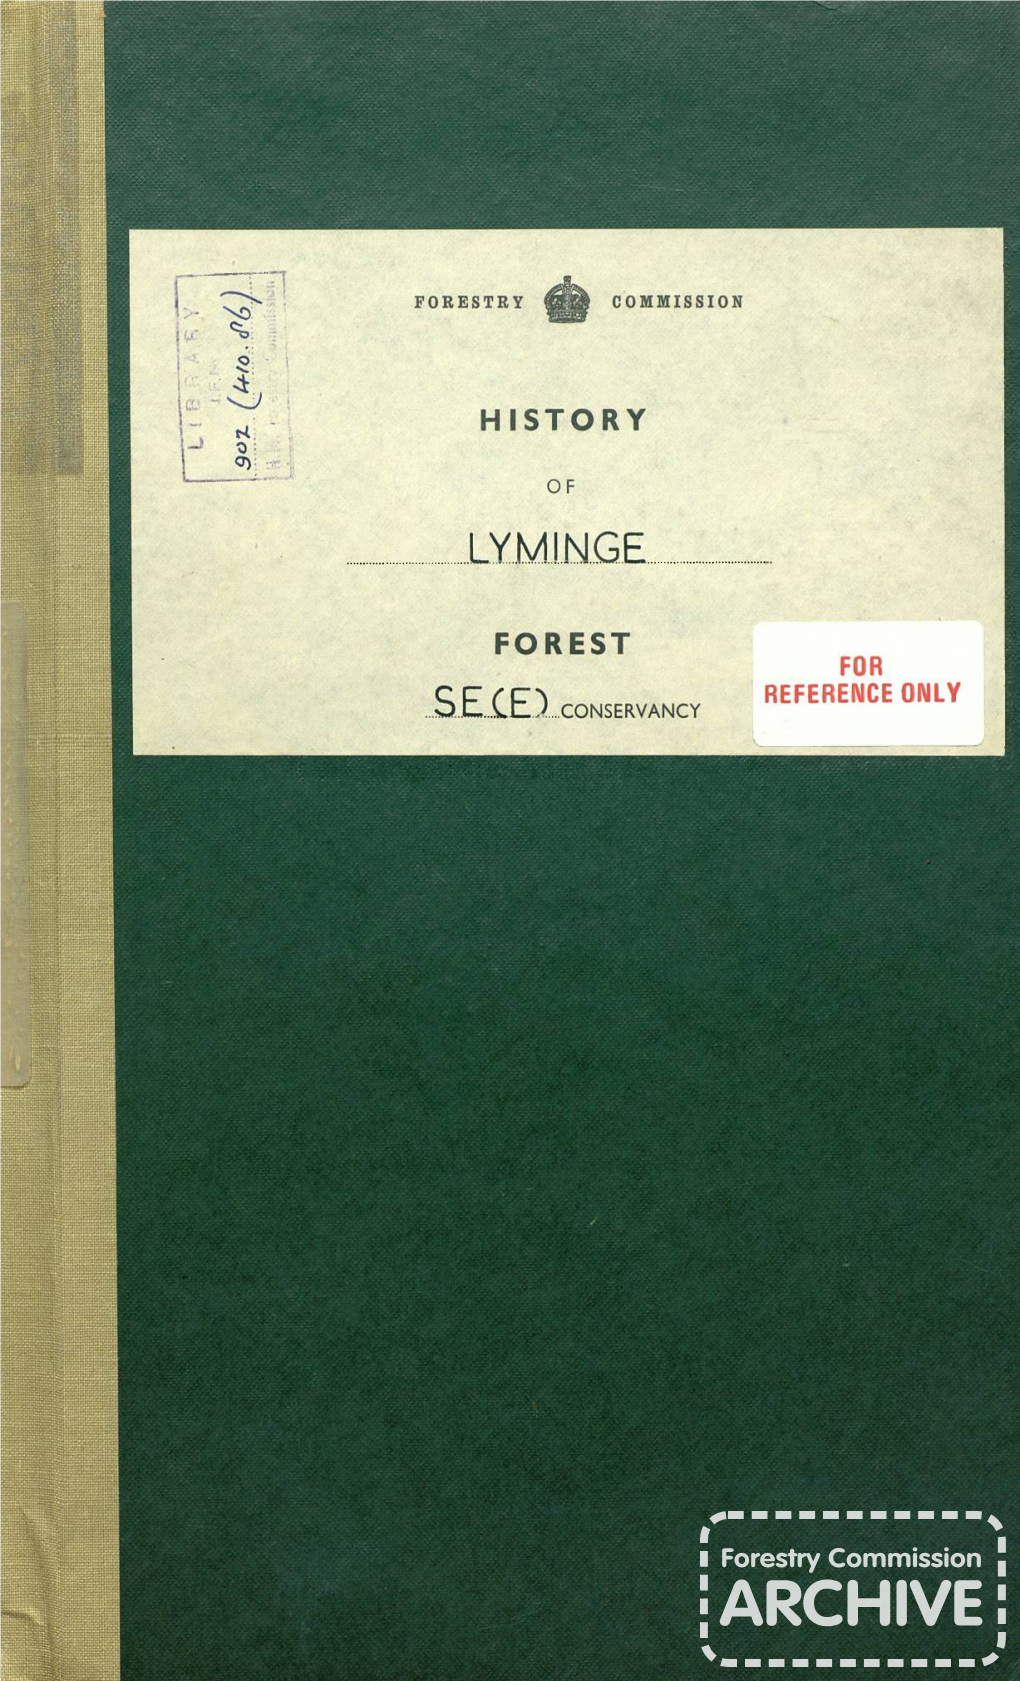 History of Lyminge Forest 1925-1951. South East